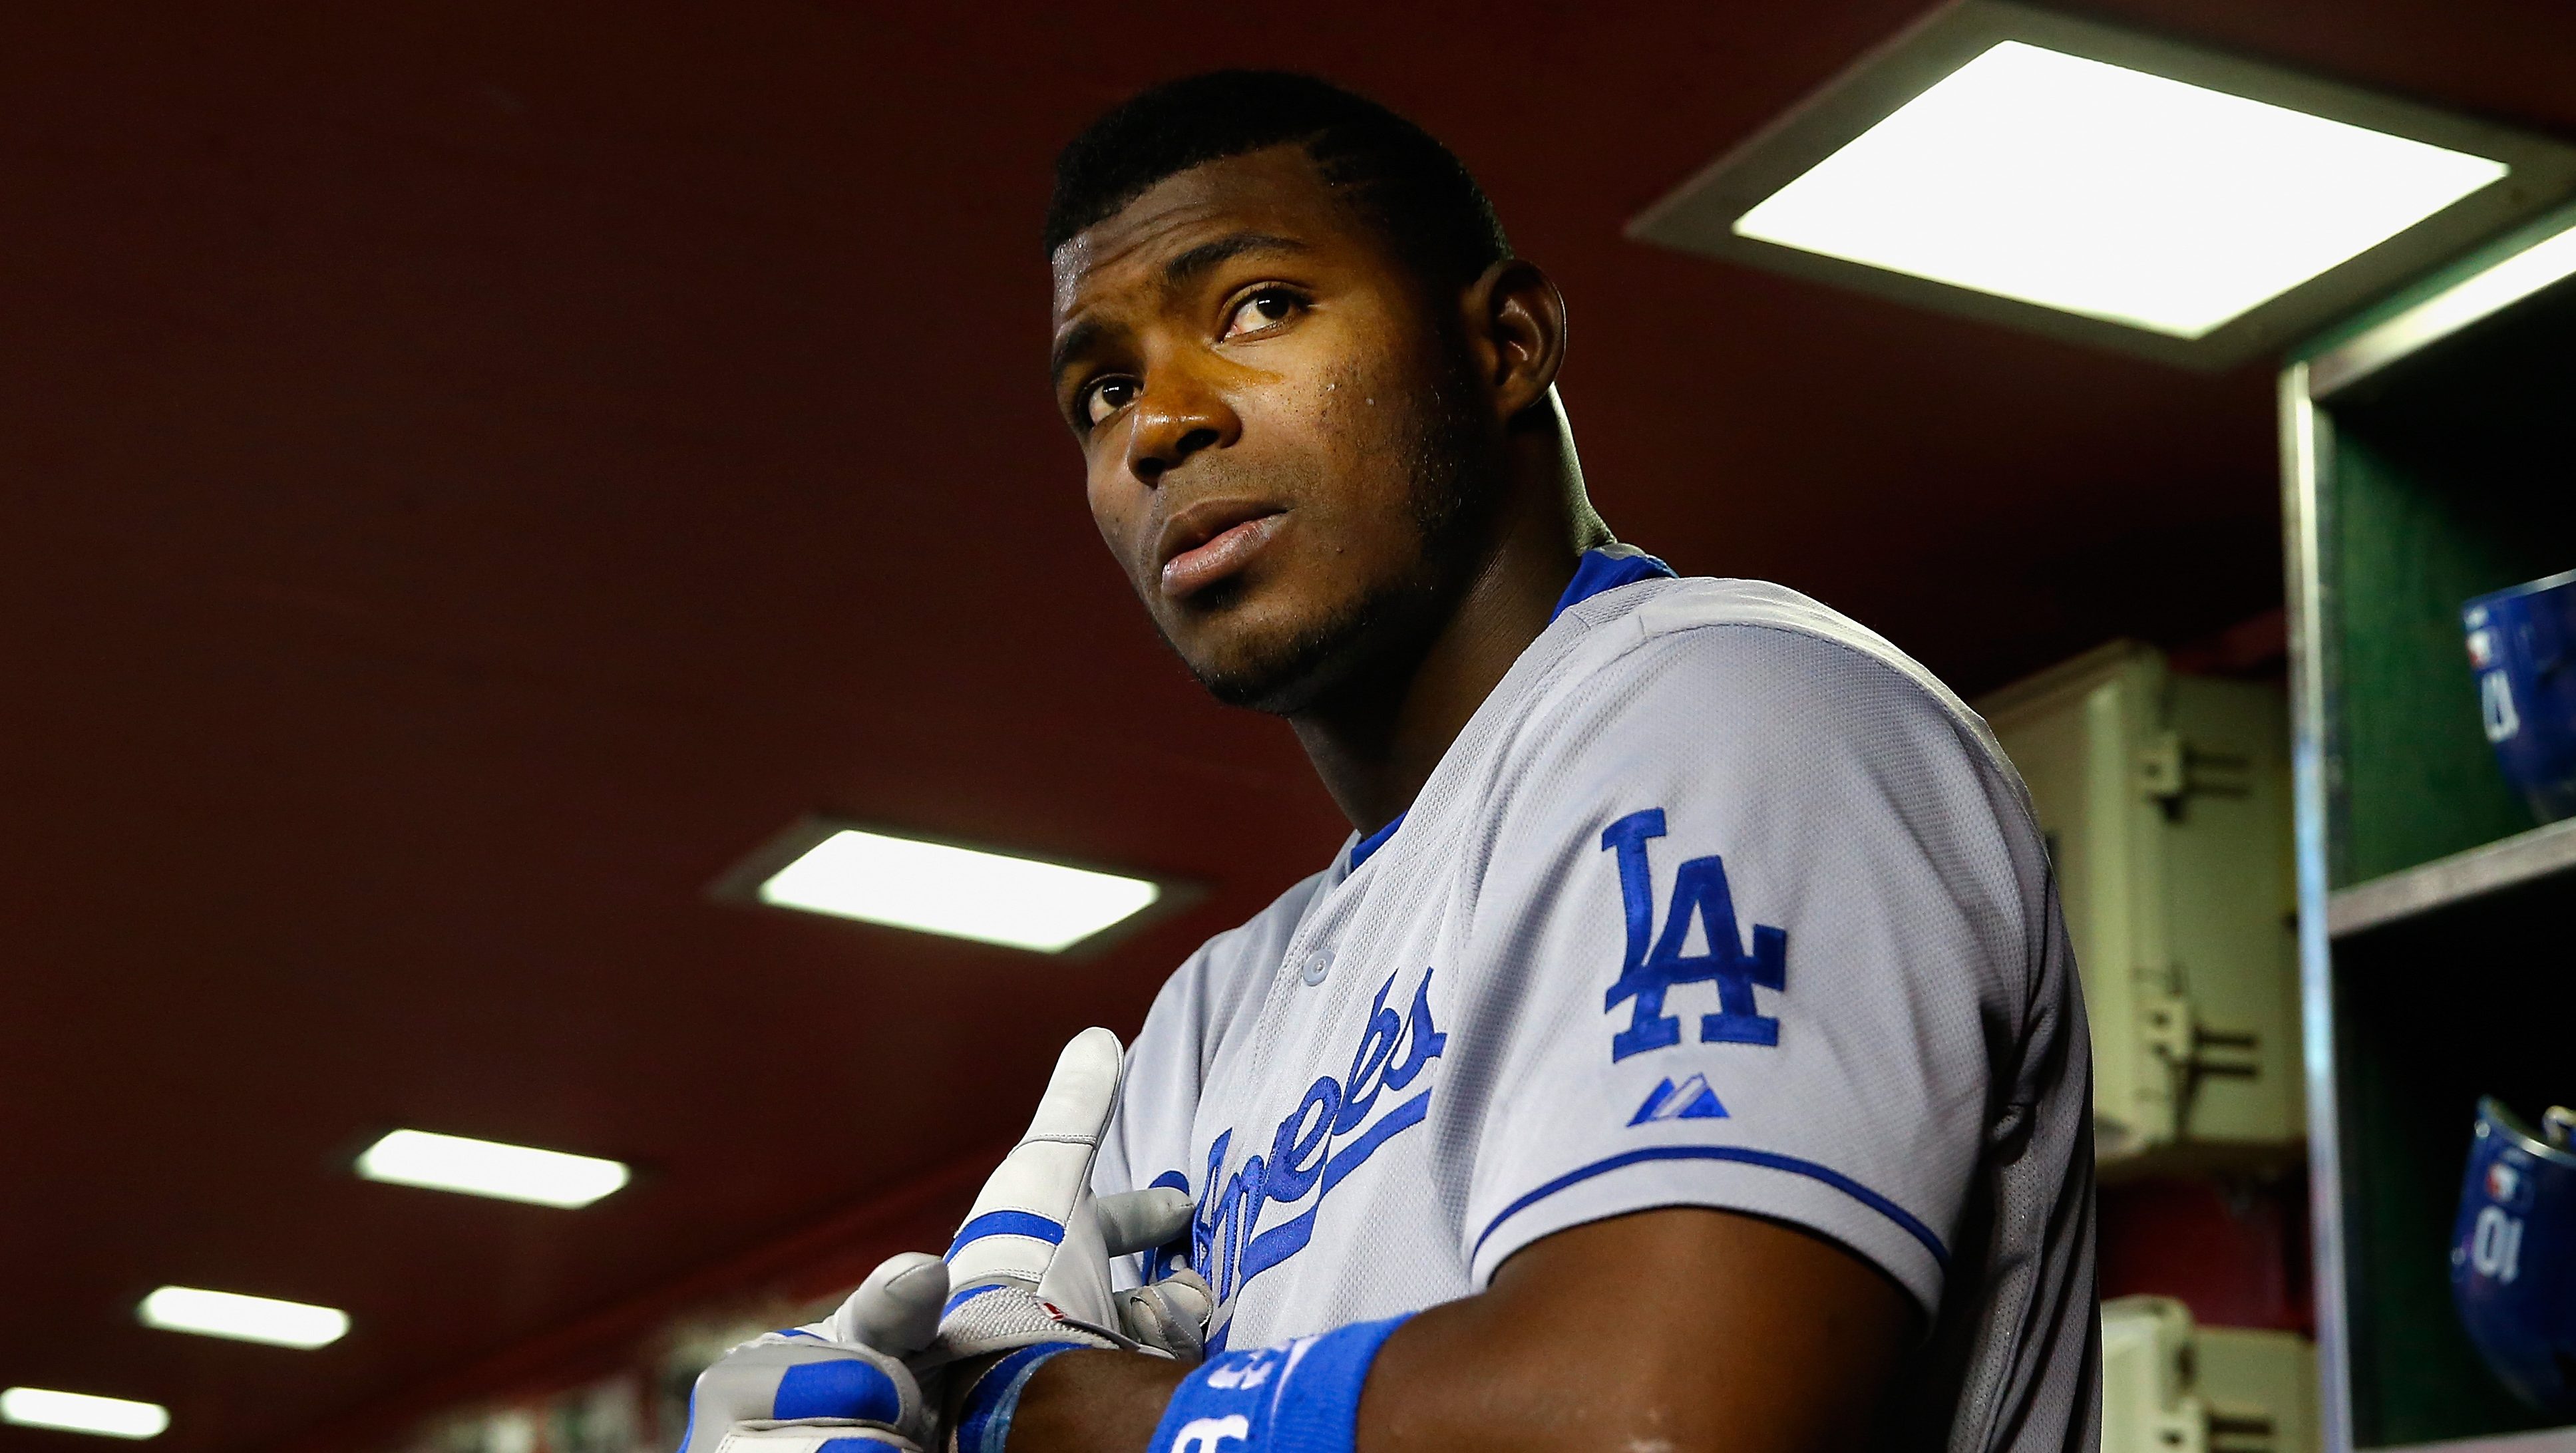 Ex-Dodger Puig Agrees to Plead Guilty to Lying About Gambling